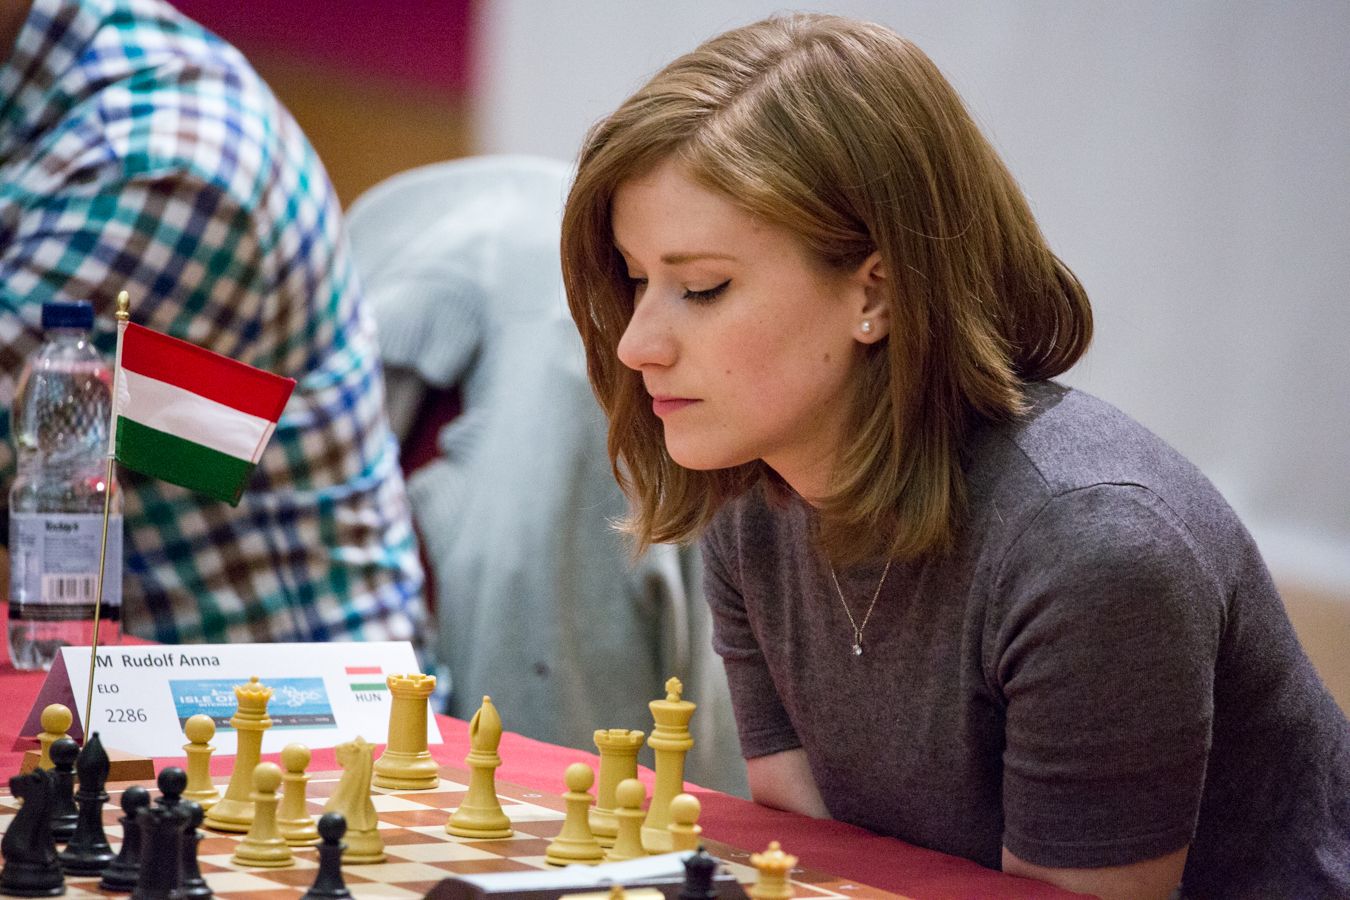 Why isn't judith in the women's leaderboard in ratings.fide? : r/chess